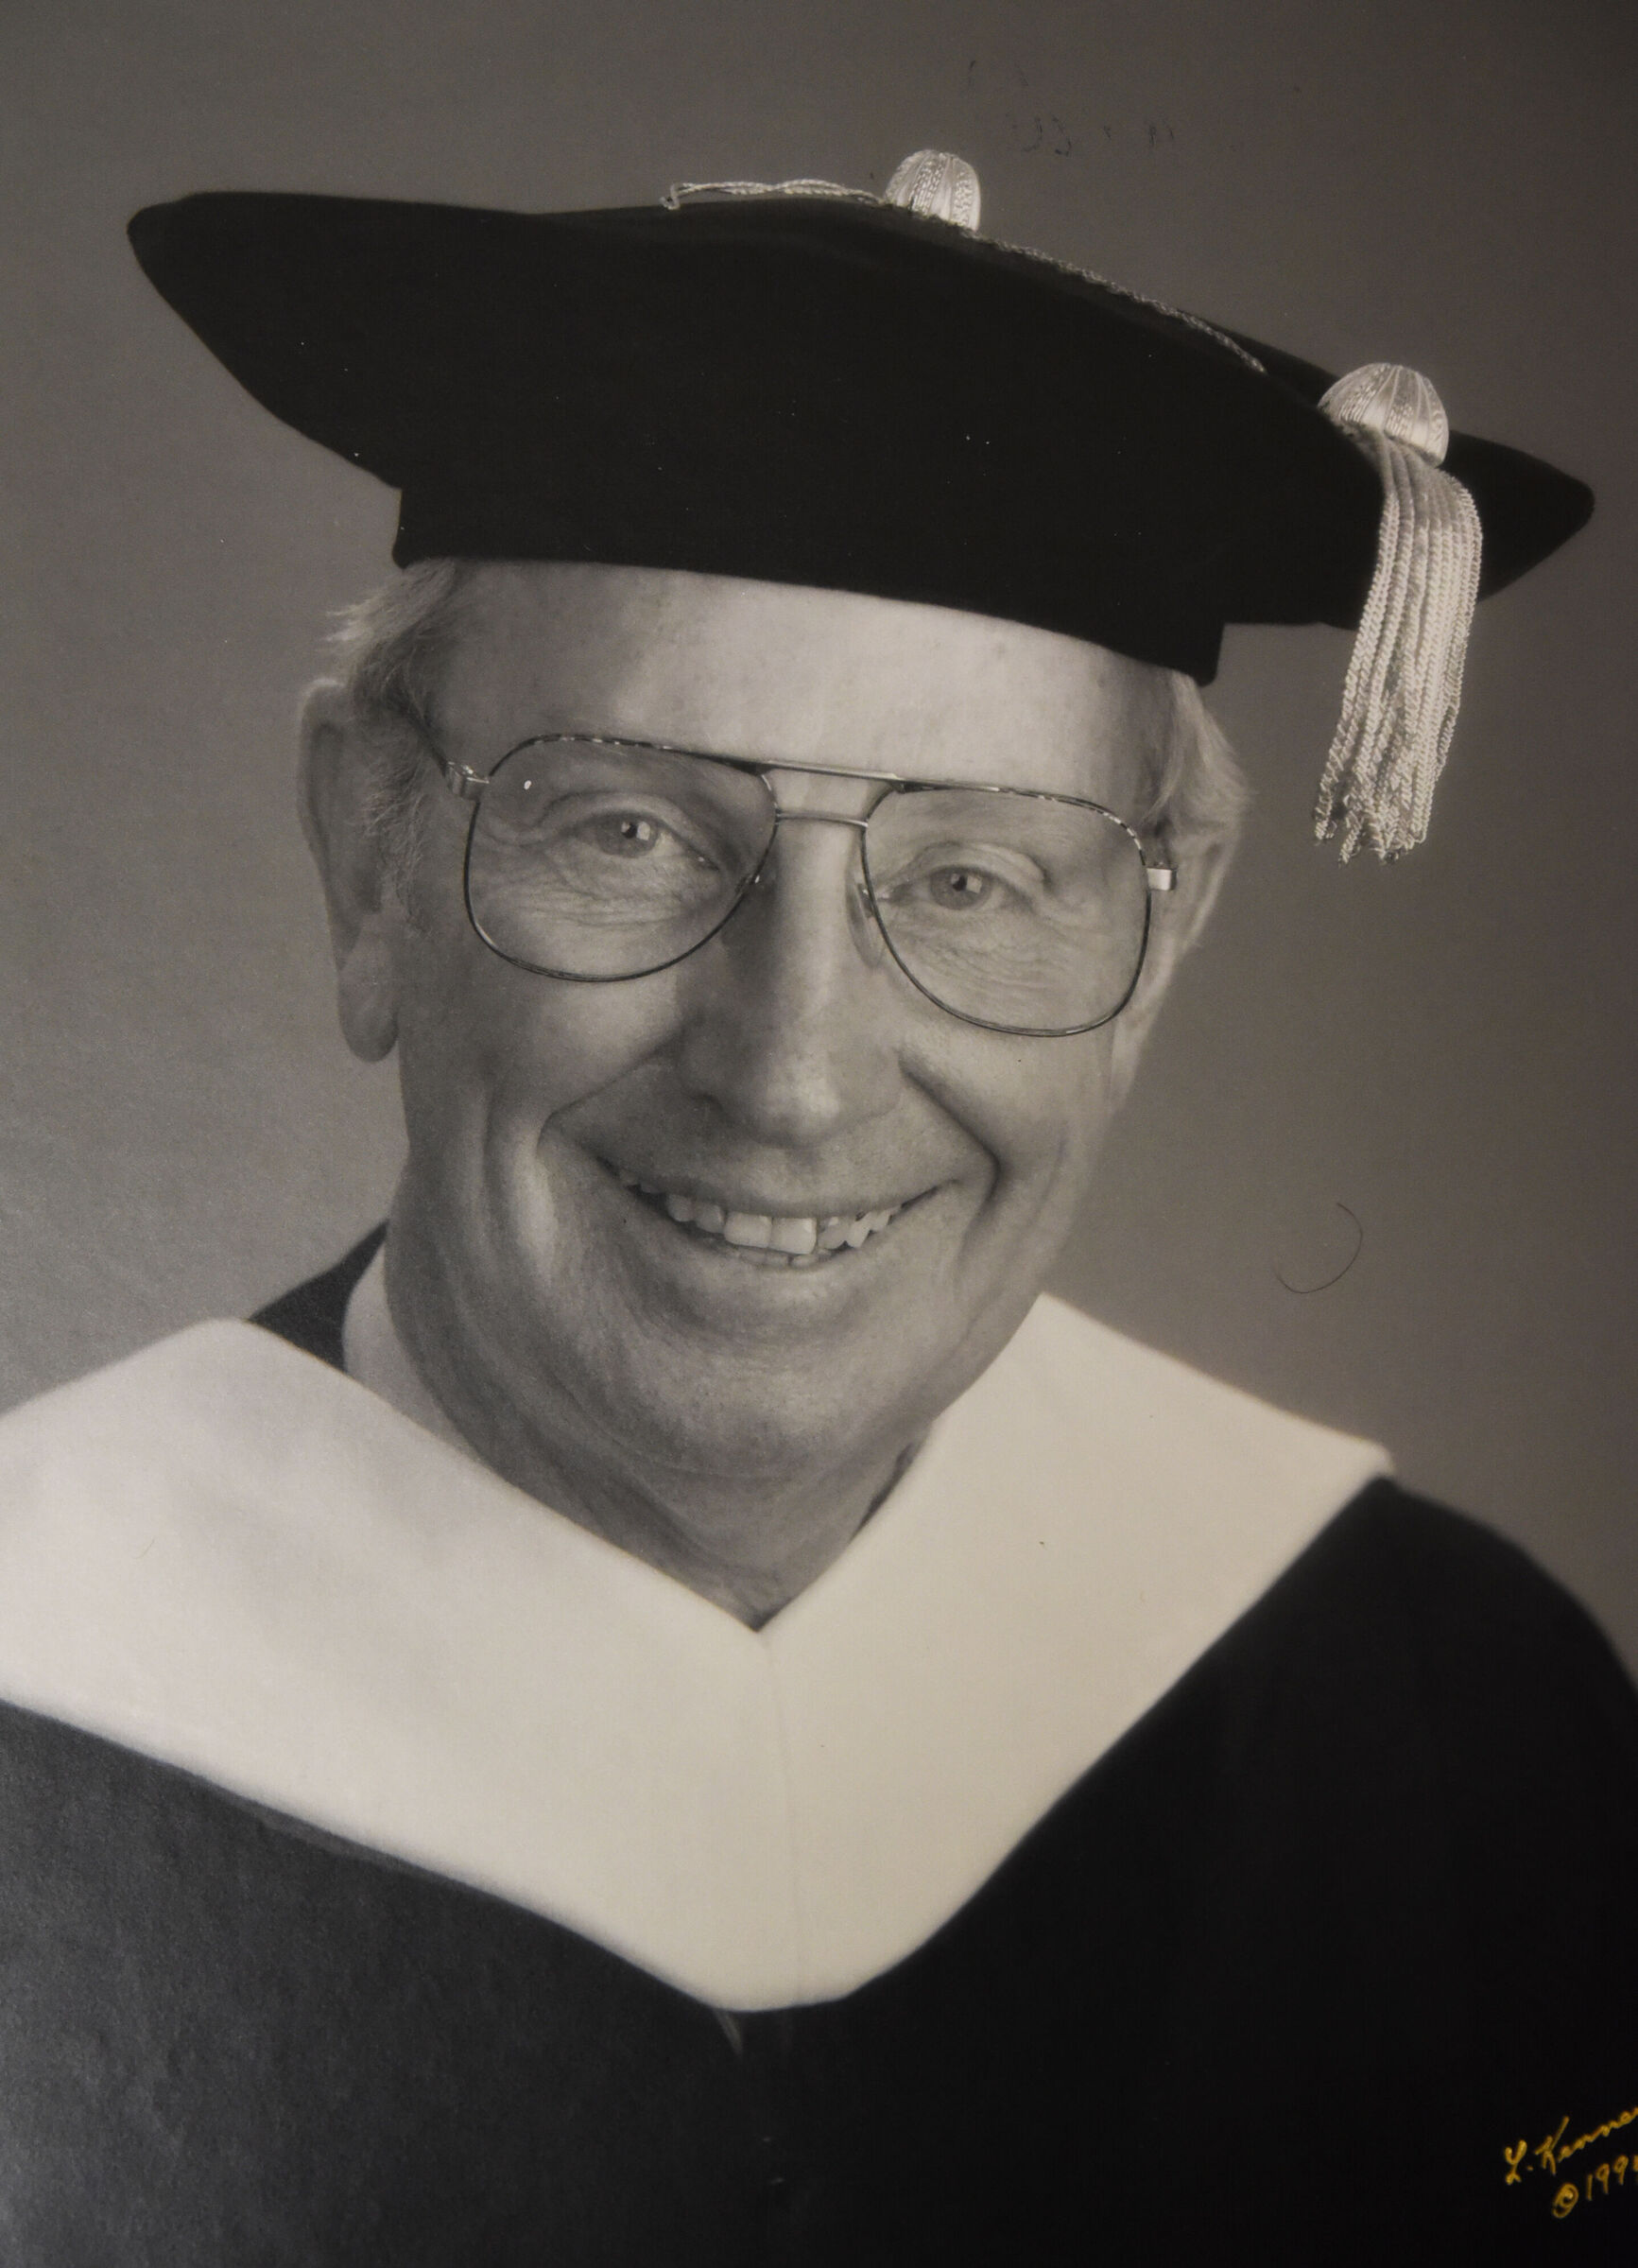 A Tribute to W. Richard Stephens, Greenville College president for 16 years 